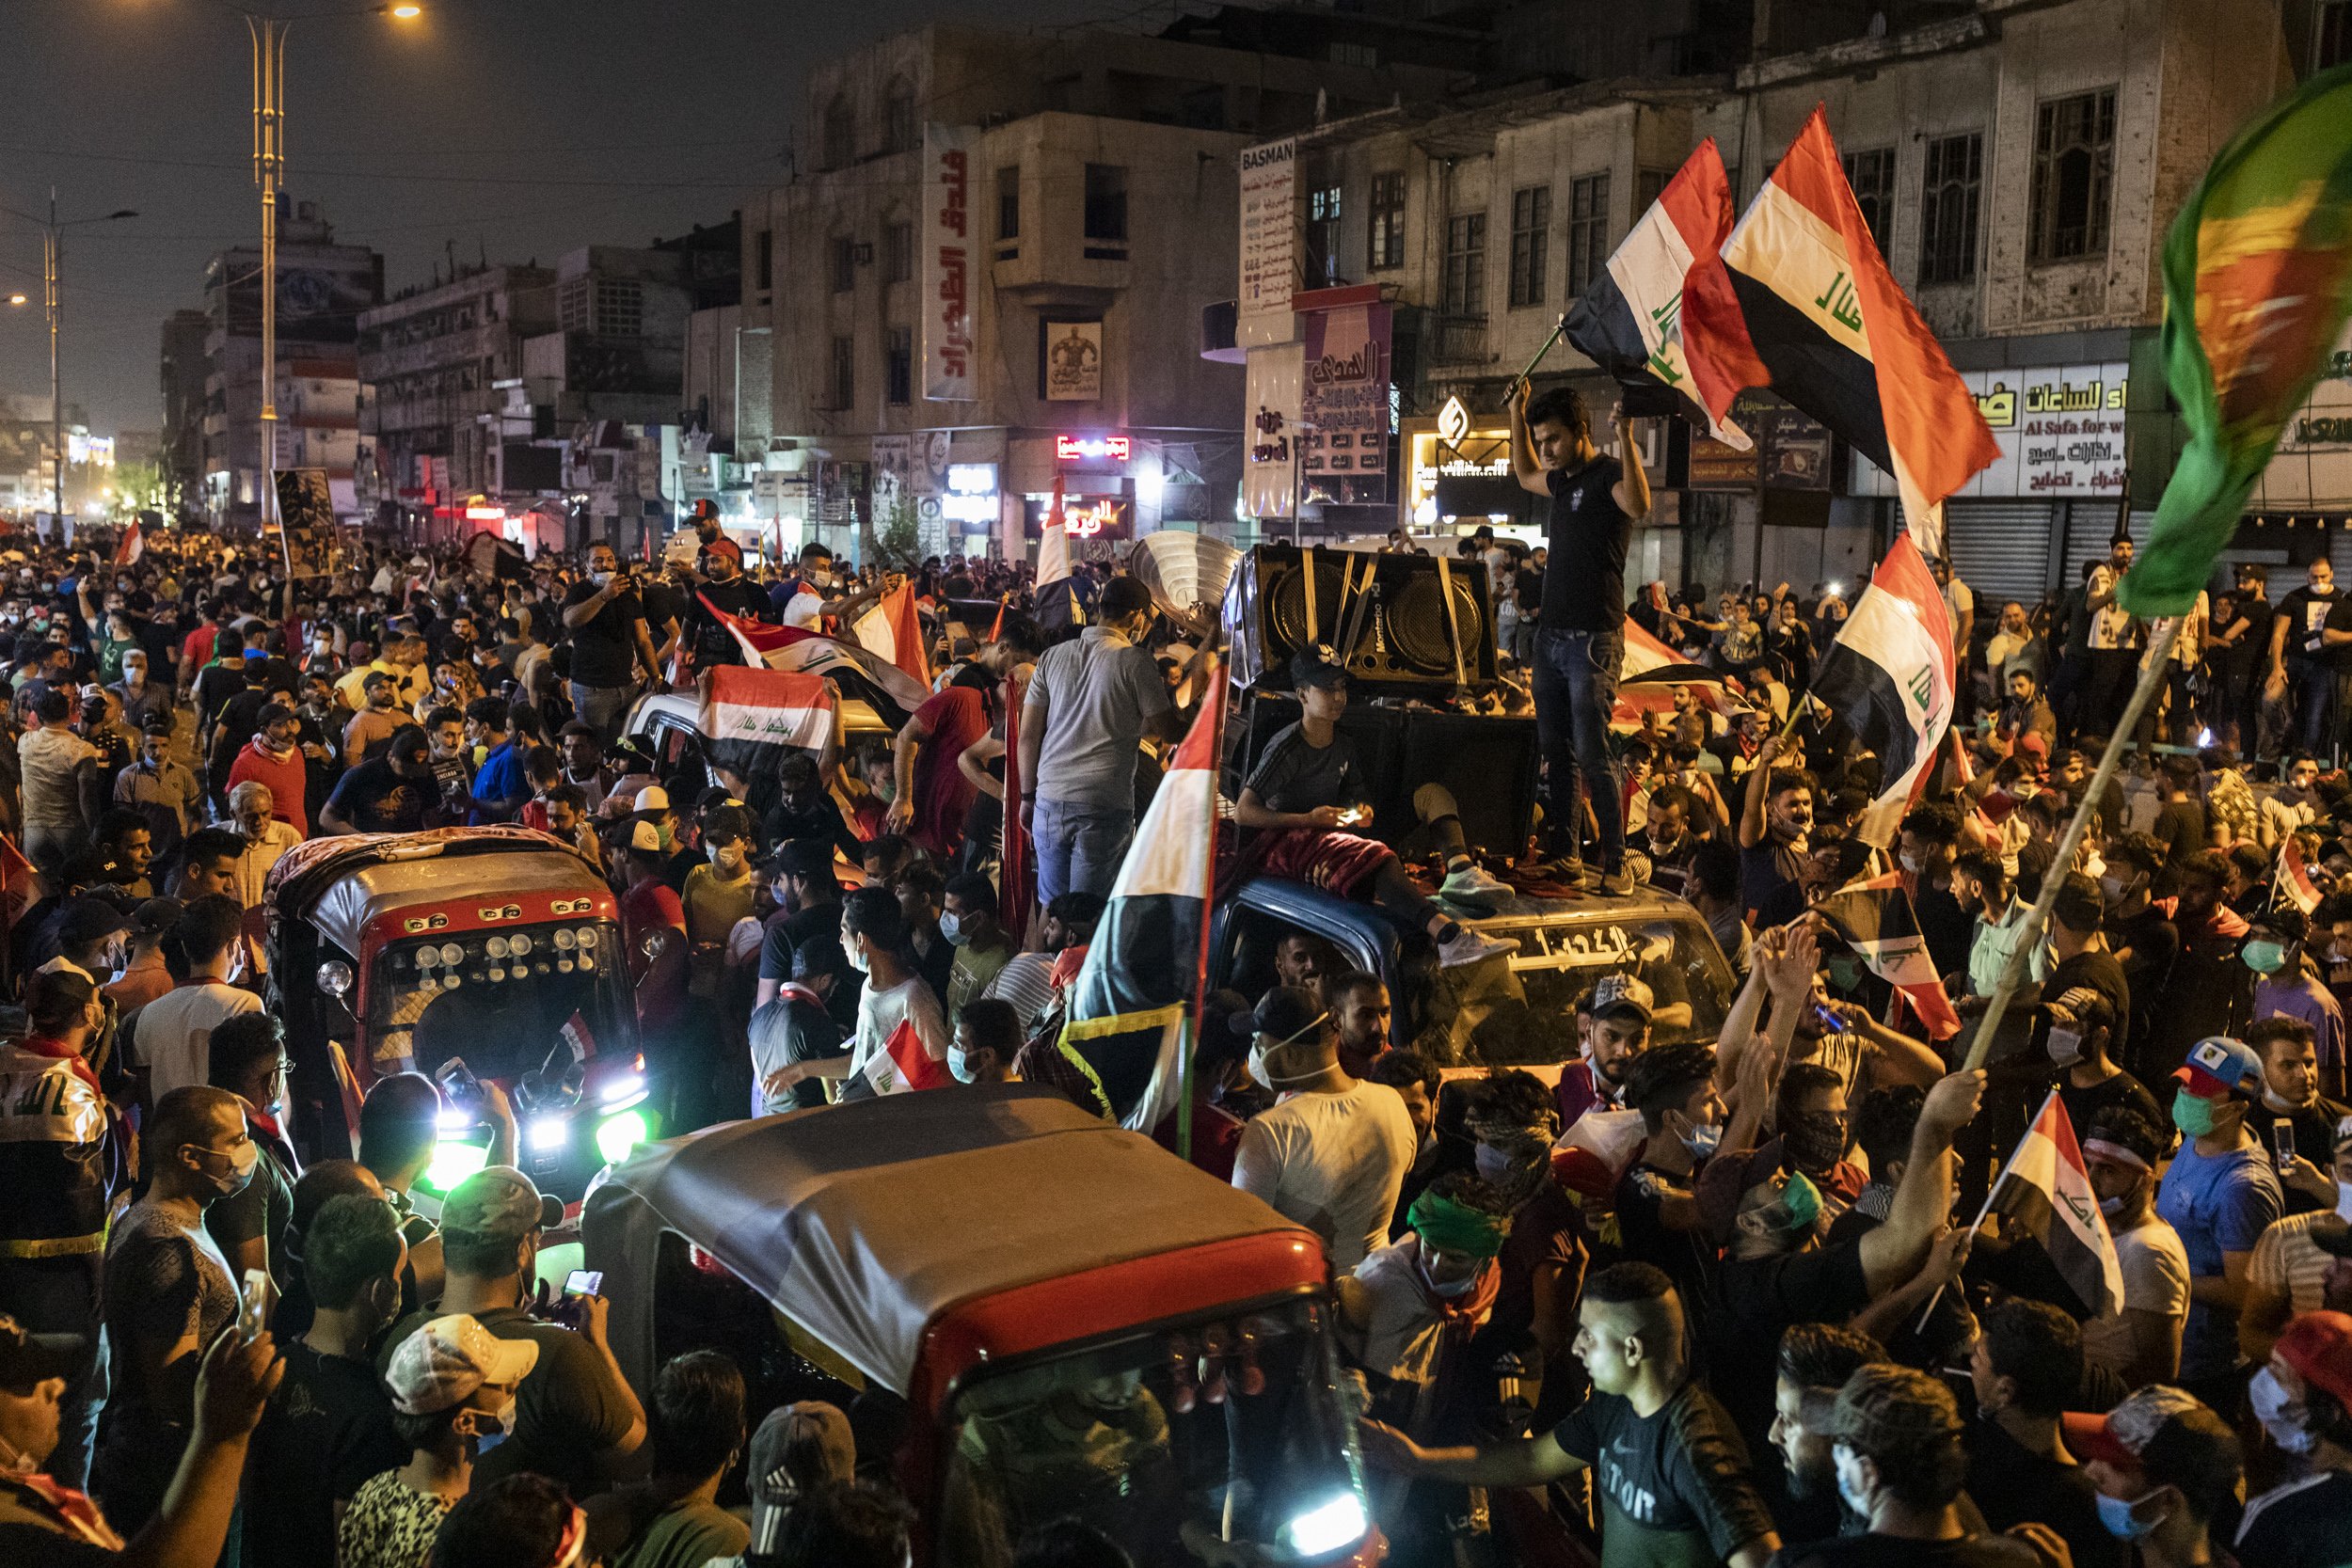  People crowded the streets at night around Tahrir Square, Baghdad, during the height of anti-government protests in Iraq in late October. 